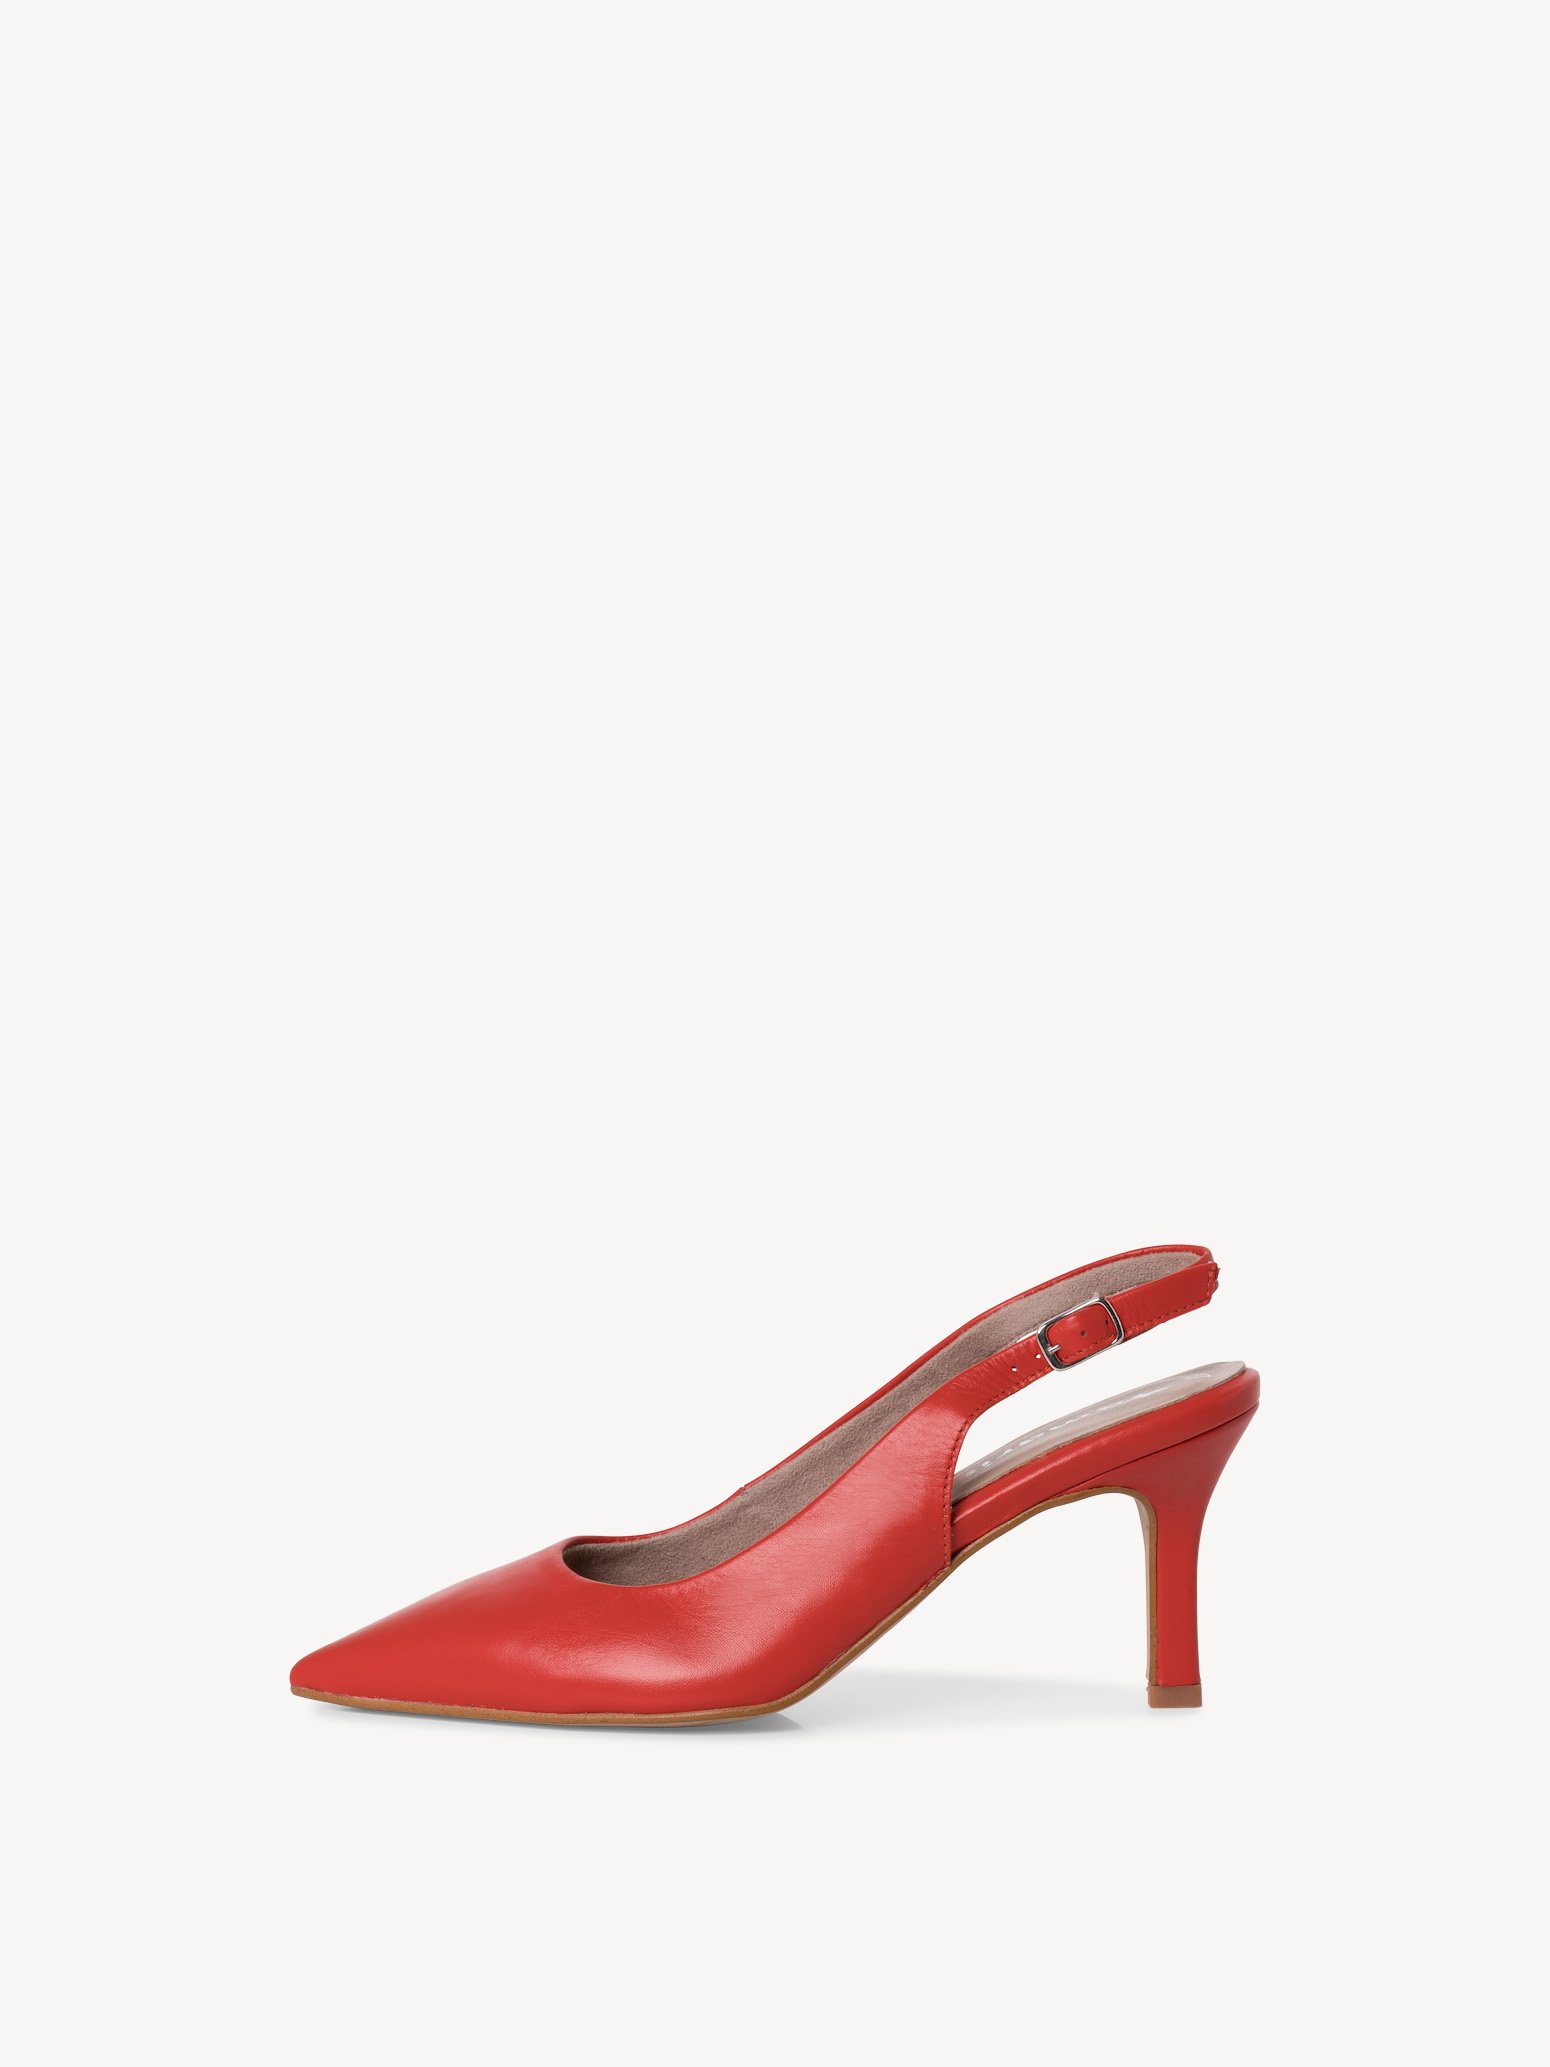 Leather sling pumps - red